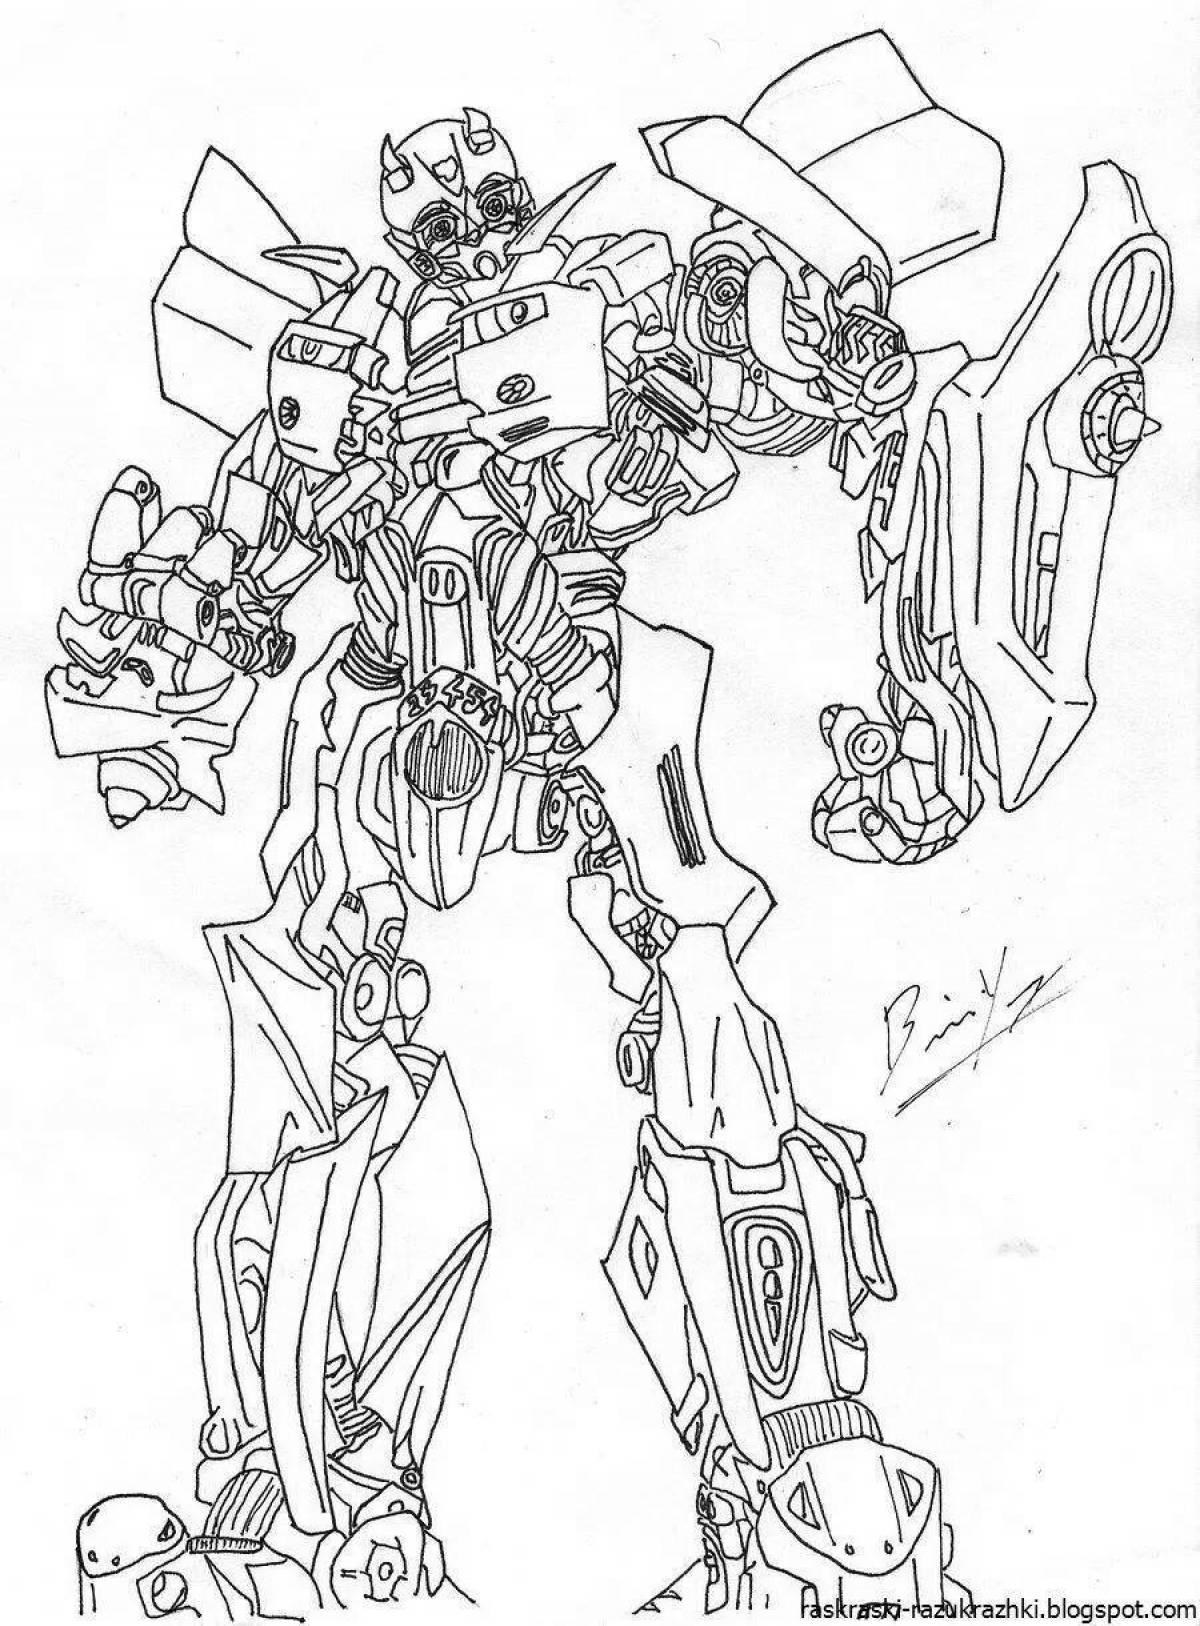 Colorful bumblebee robot coloring page for kids